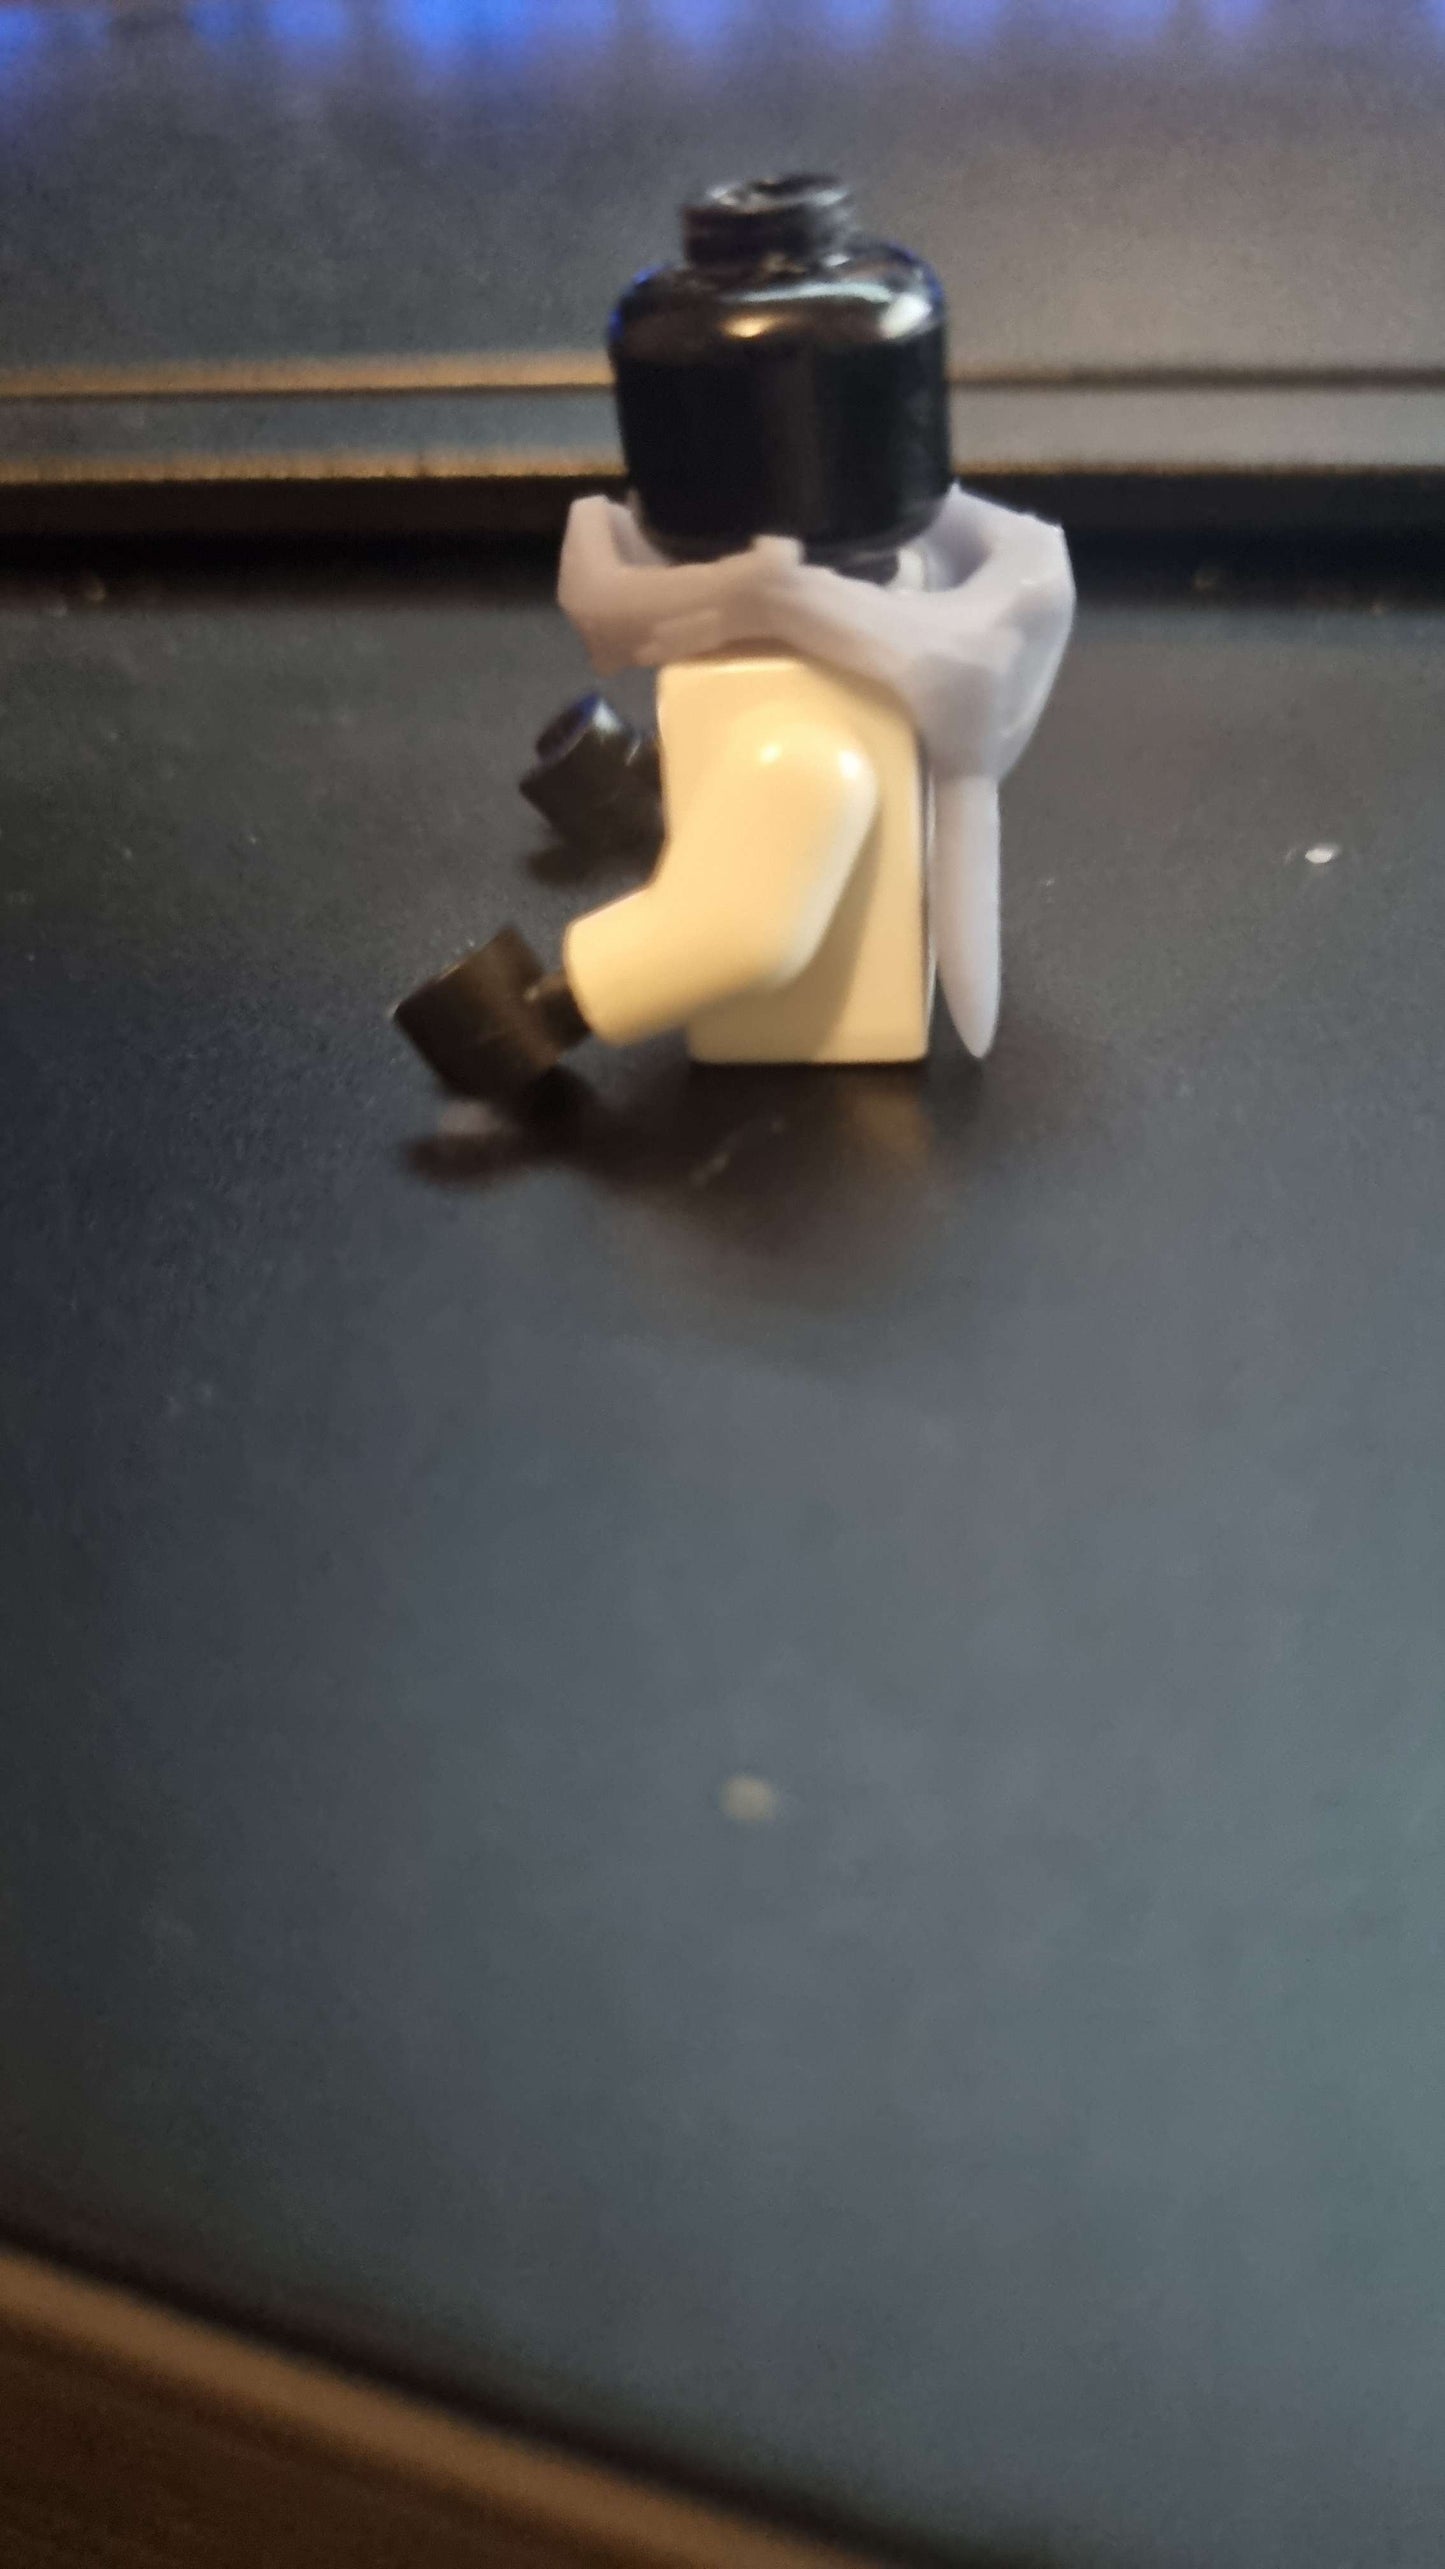 Building toy custom 3D printed bunny mask and mouth guard